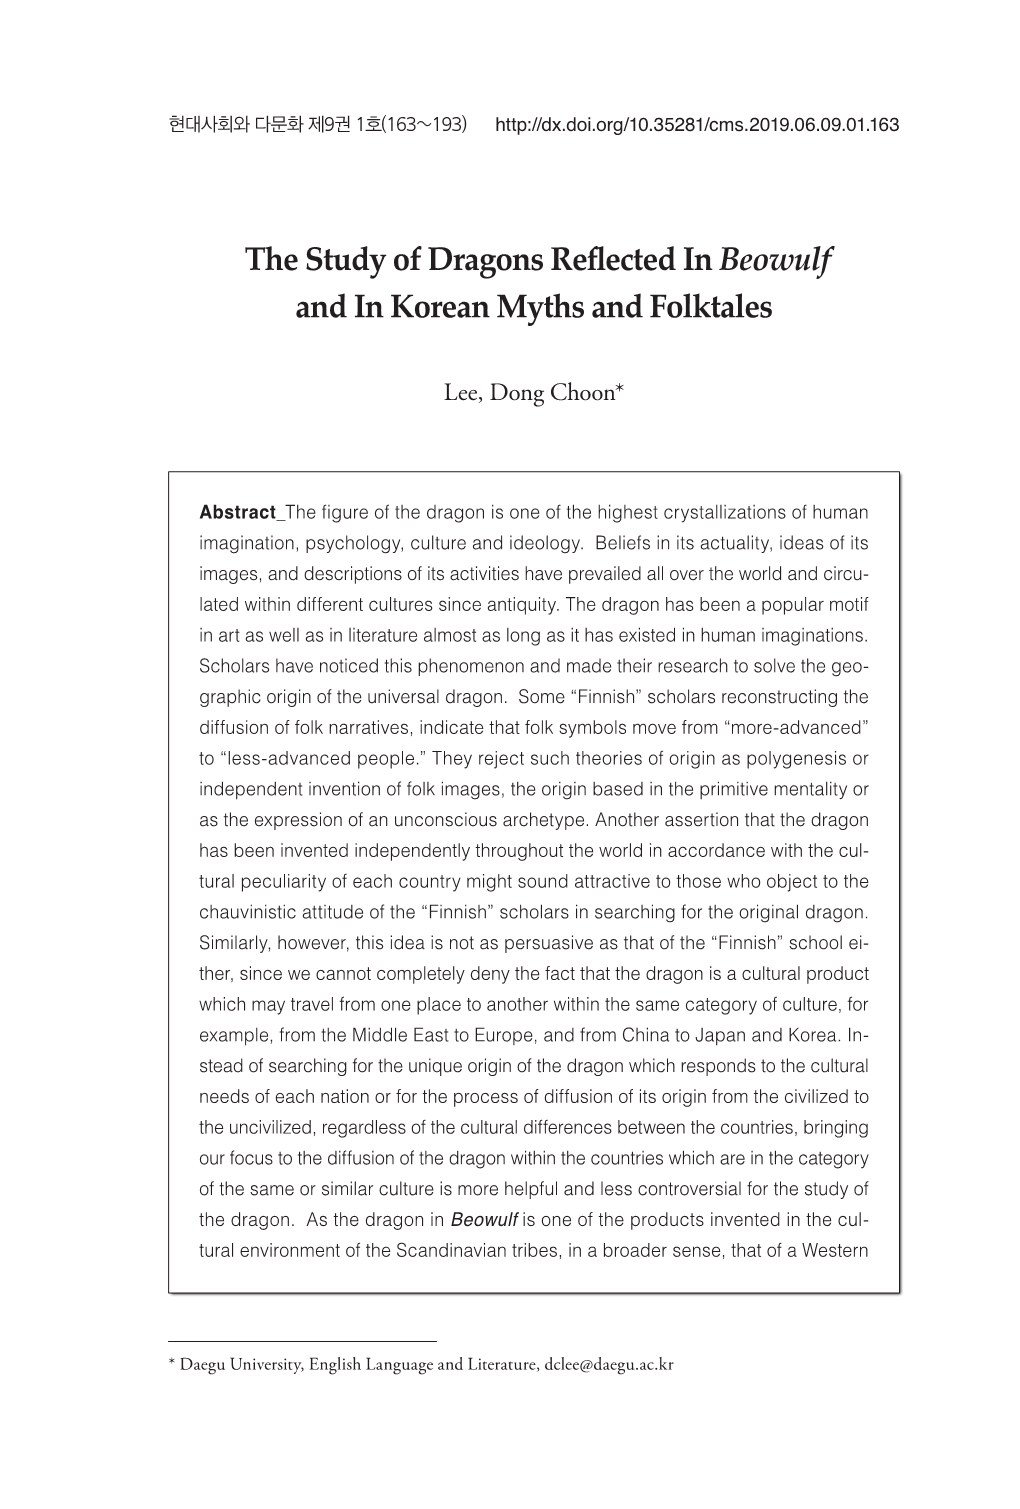 The Study of Dragons Reflected in Beowulf and in Korean Myths And